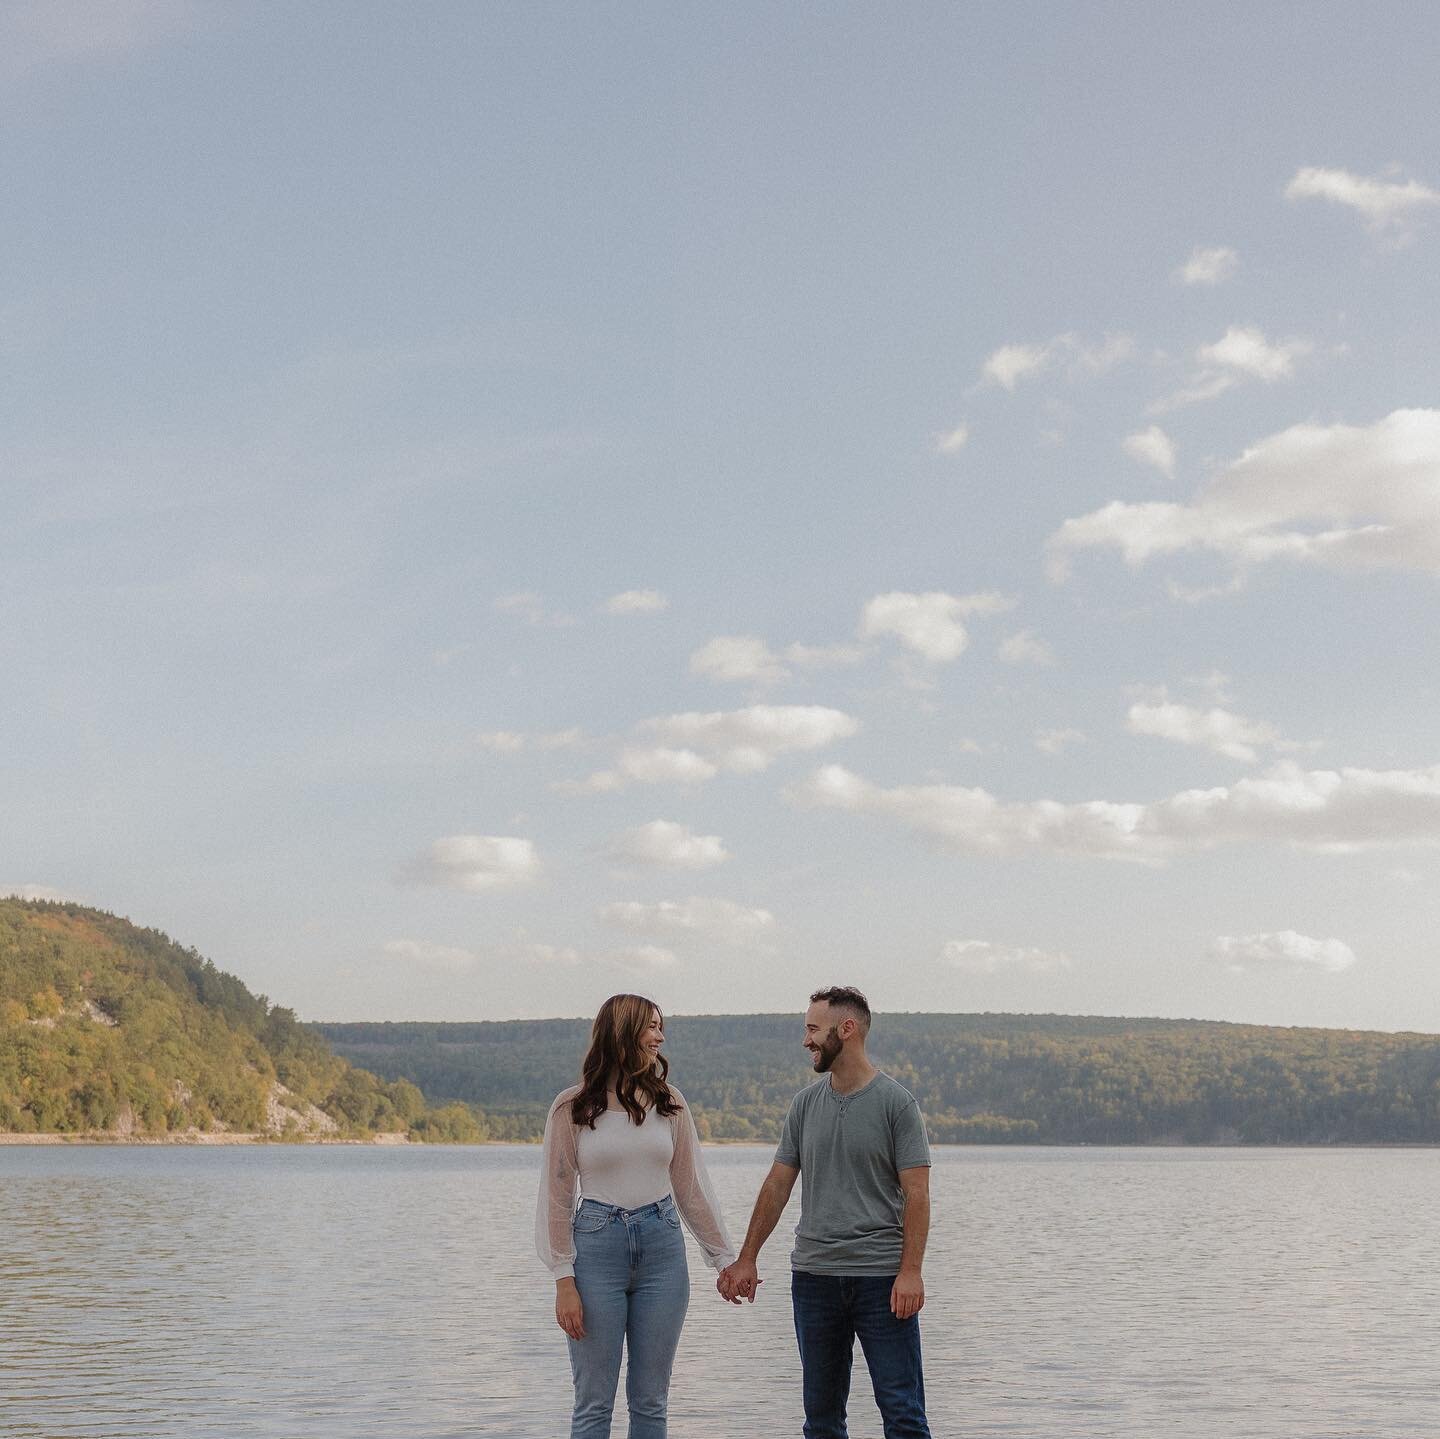 Miranda &amp; Jordan&rsquo;s dreamy engagement session at devils lake was a favorite of the summer🤍 this was my first time shooting at devils lake &amp; still in awe of the beauty!